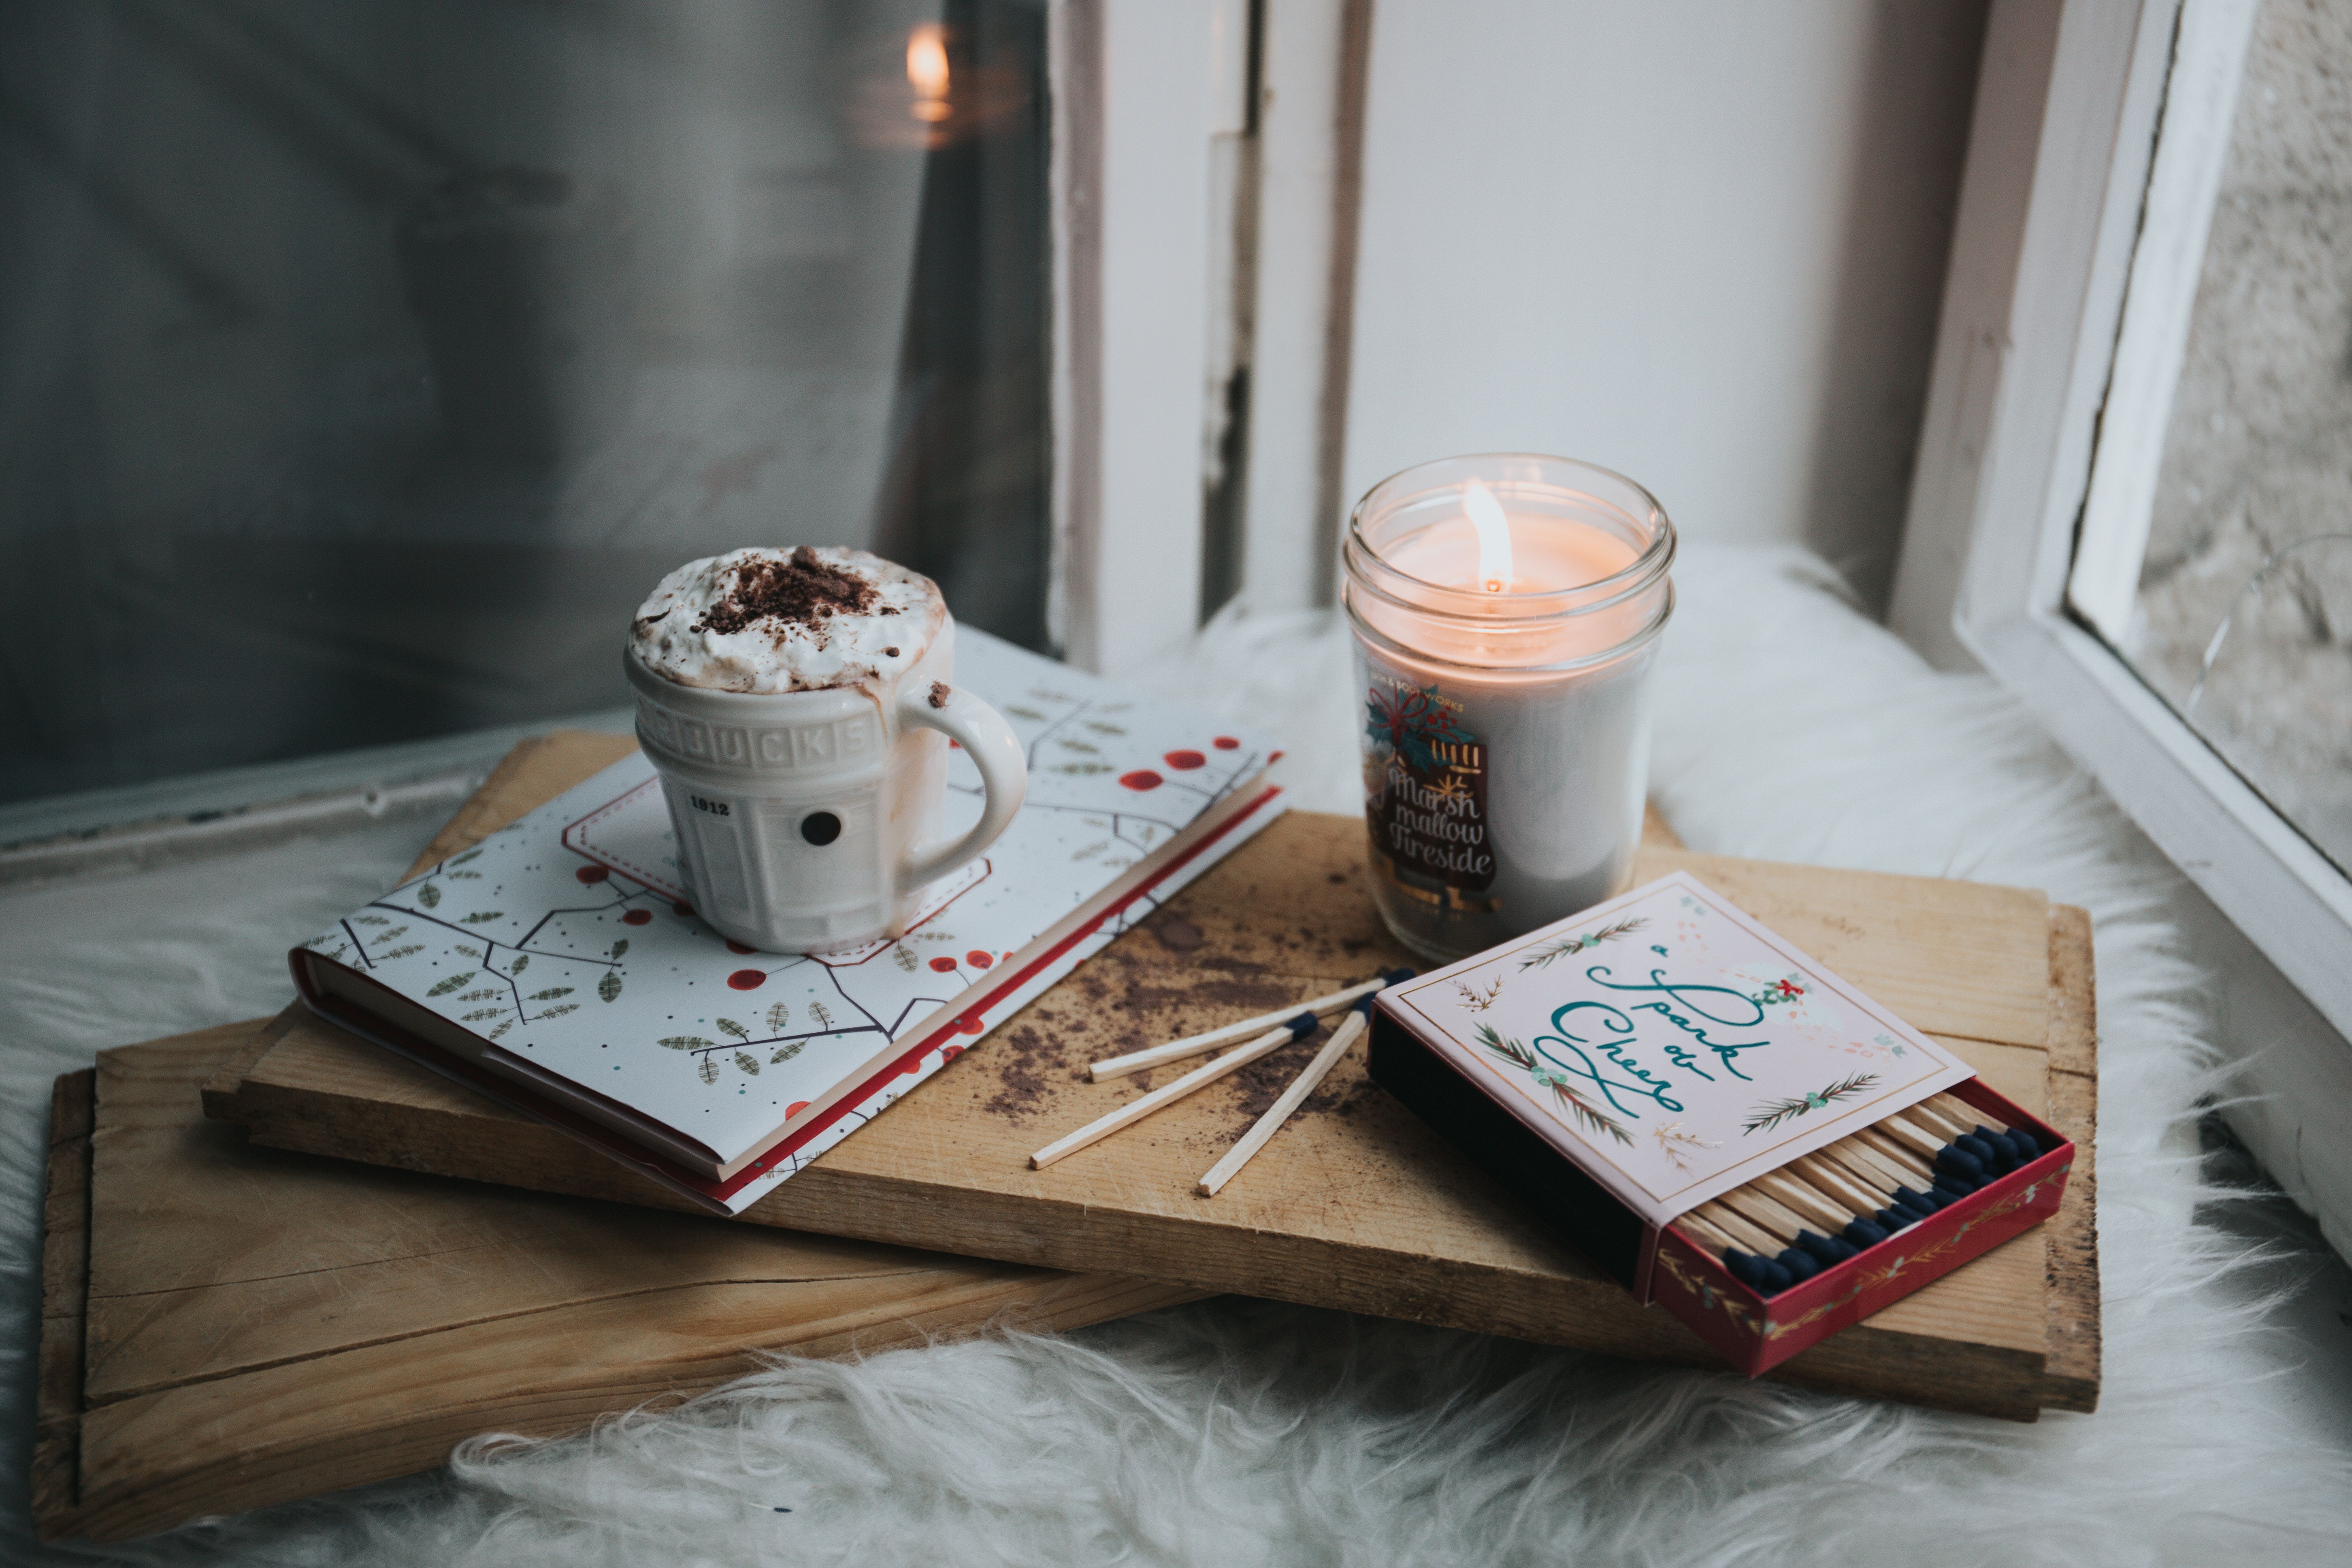 A candle, book and matches on top of some wood - Cozy